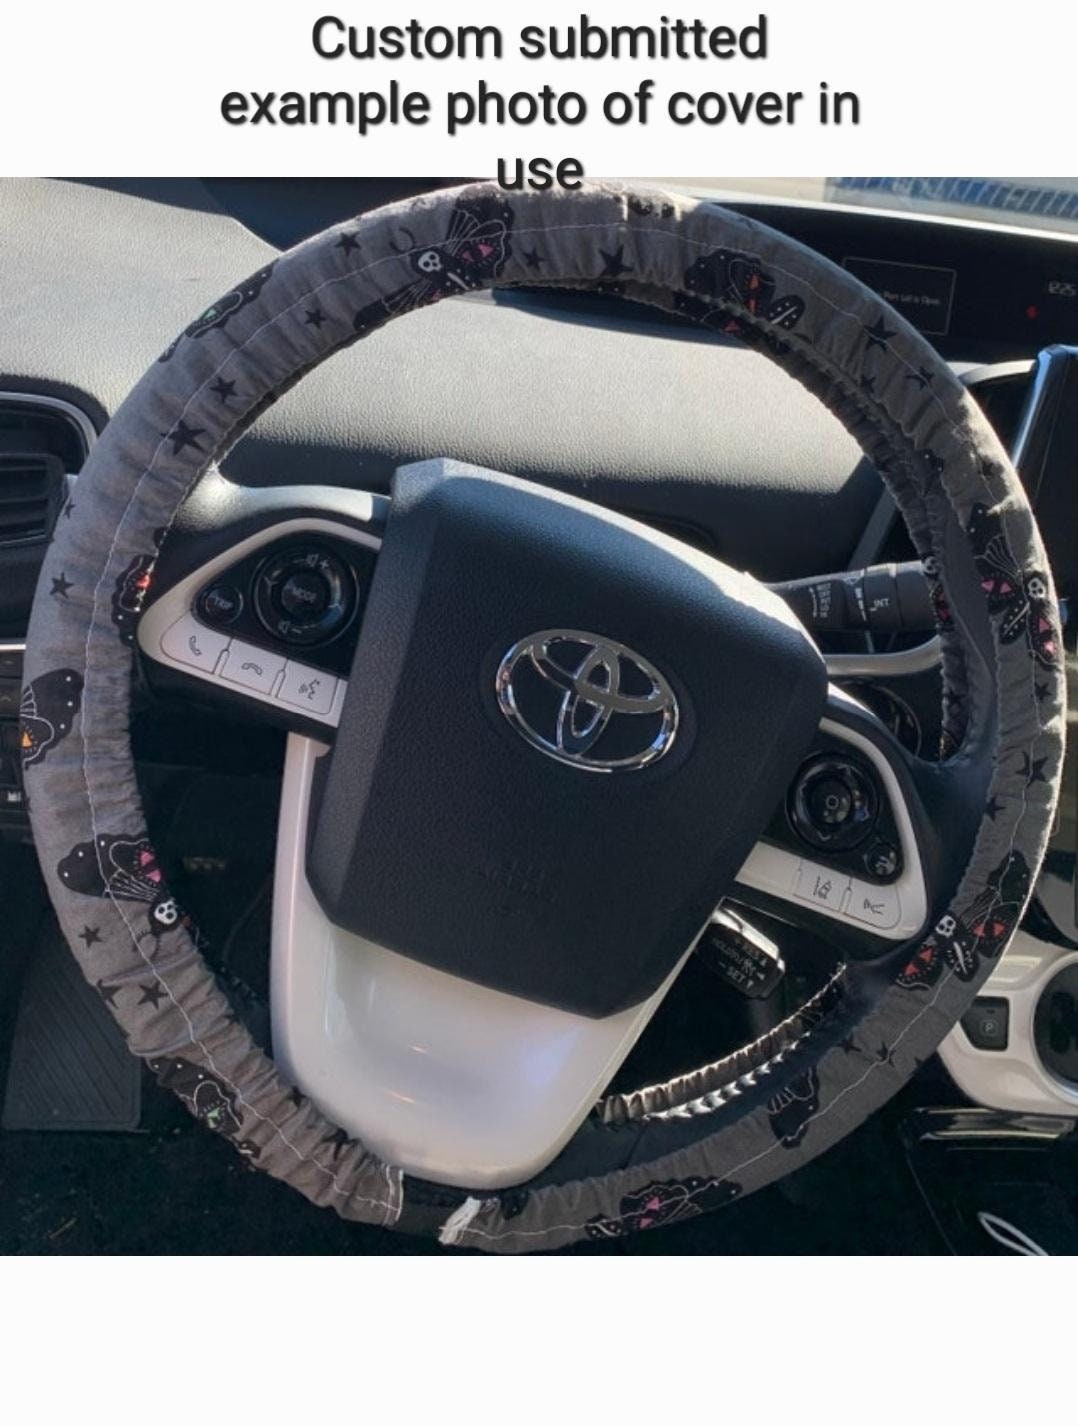 Watercolor Floral Steering Wheel Cover - Harlow's Store and Garden Gifts